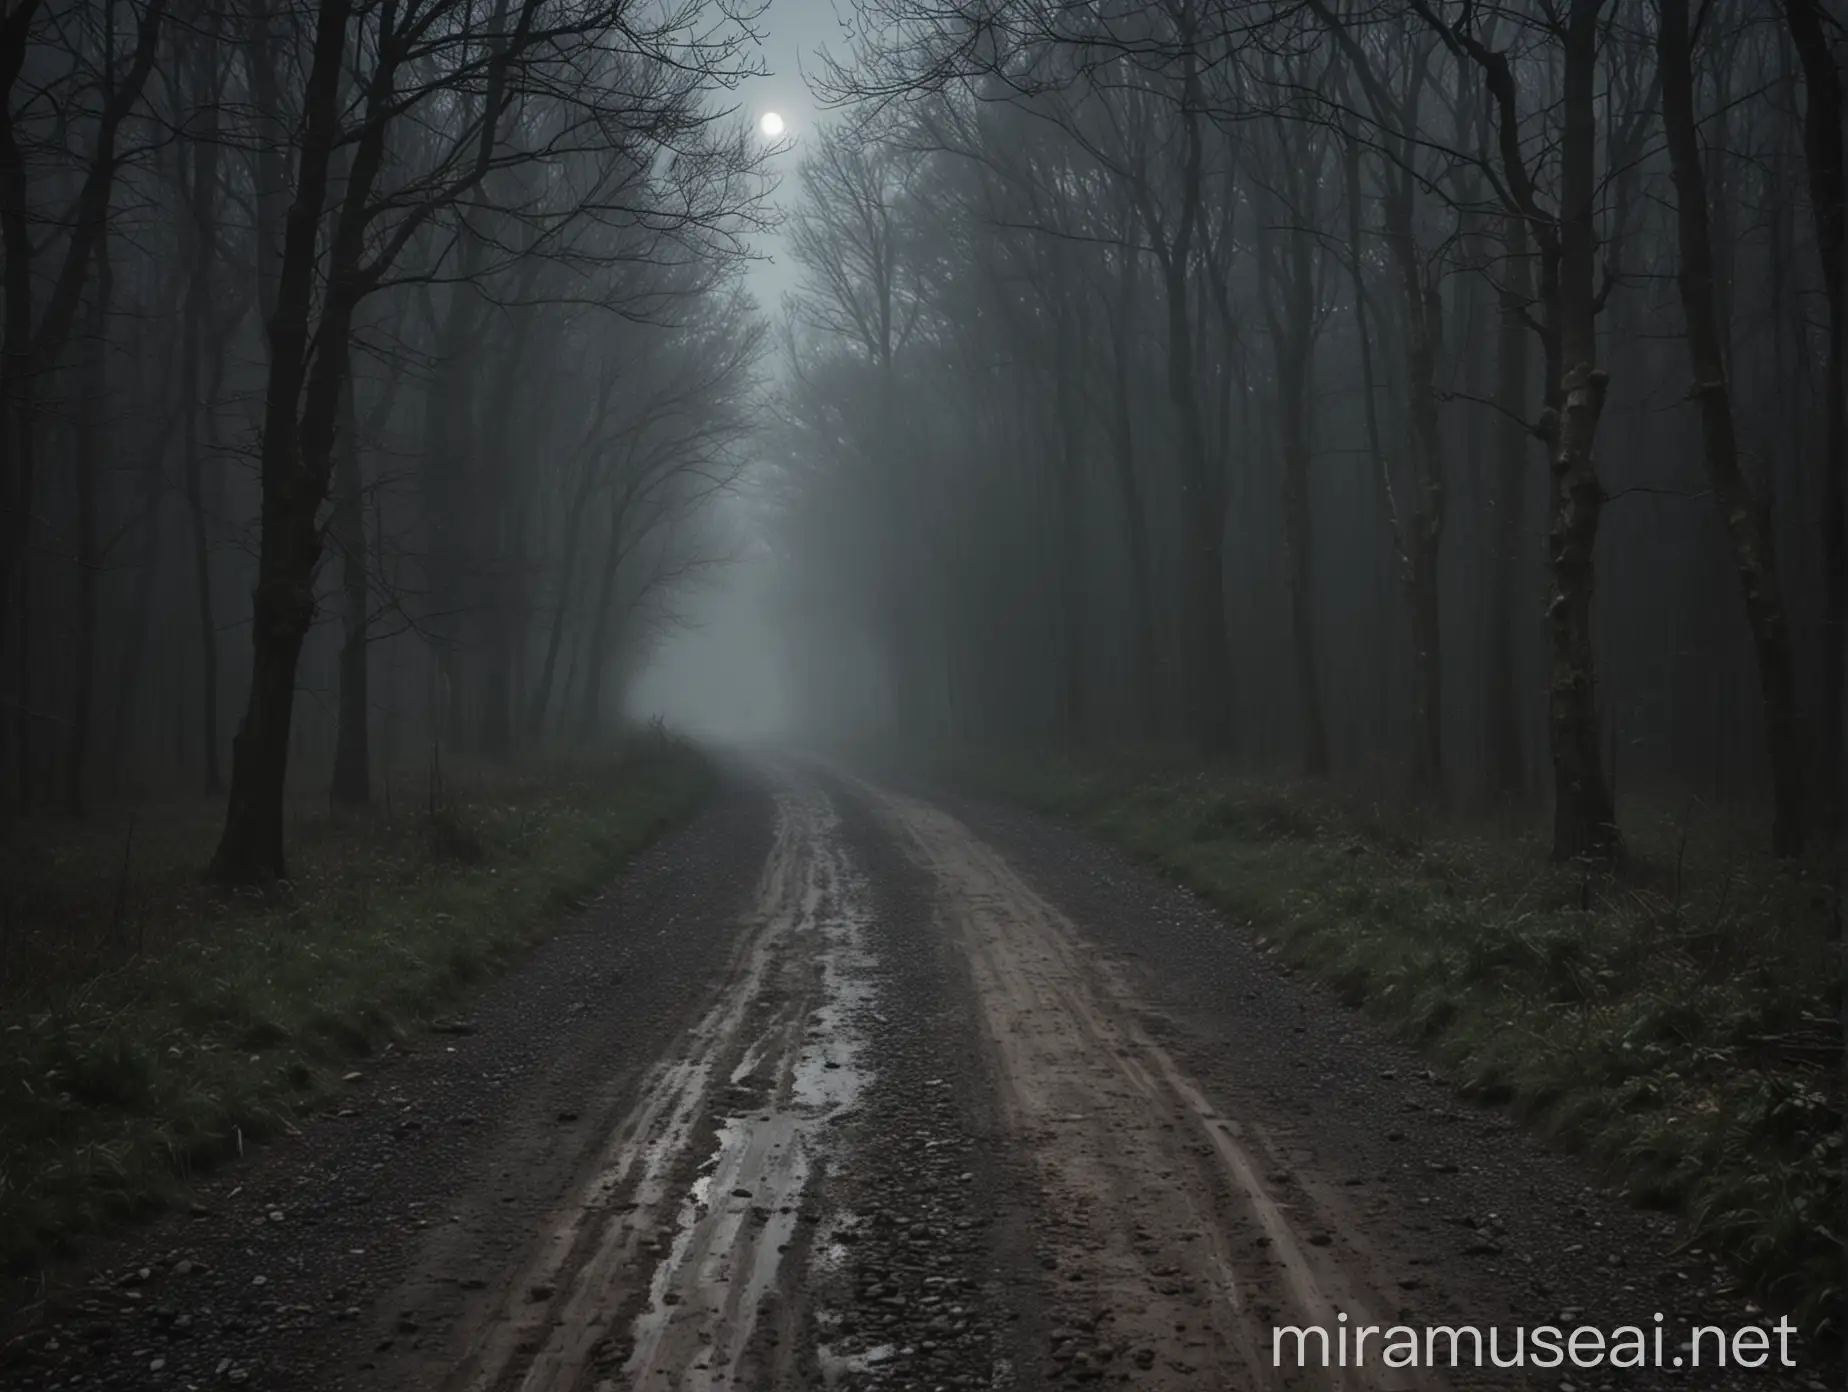 dirt road in the middle of the woods at night in a gloomy, dark and scary atmosphere, without natural light